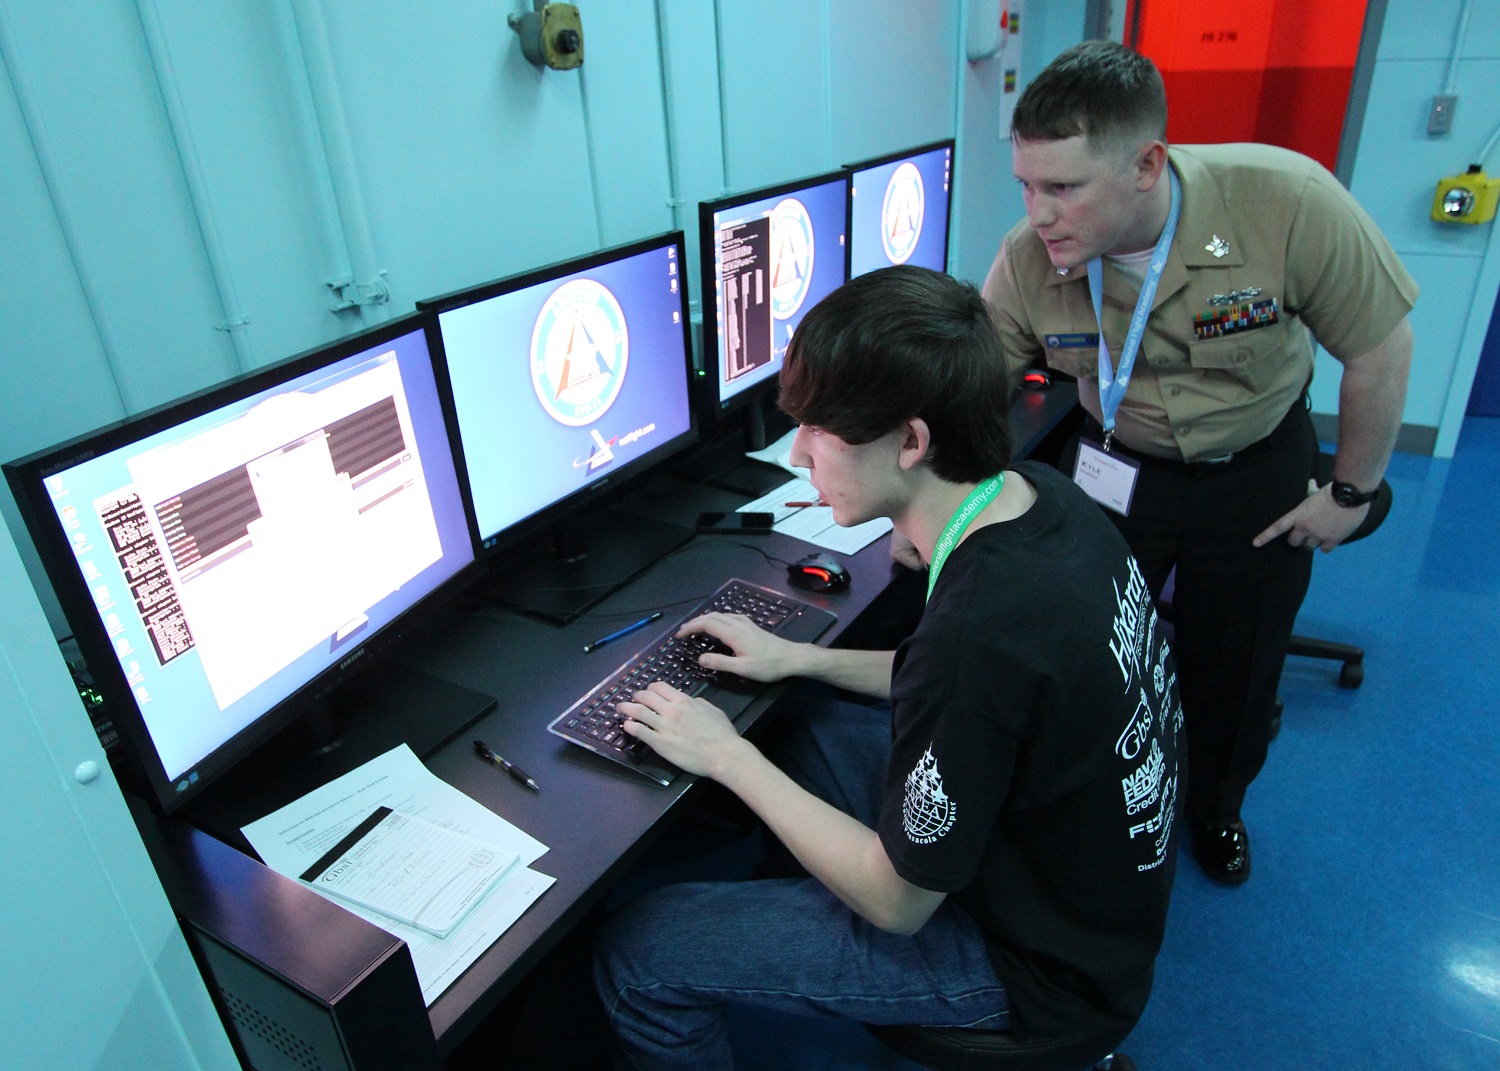 Information Systems Technician 1st Class Kyle Gosser, an instructor at the Center for Information Dominance Unit Corry Station, mentors a local high school student participating in the inaugural Cyberthon competition at the National Flight Academy at Naval Air Station Pensacola during the weekend of Jan. 23-25. The Cyberthon competition tests student teams on their abilities to use the computer skills they learned in their classrooms to defend and defeat cyber attacks on websites. U.S. Navy photo by Ed Barker.